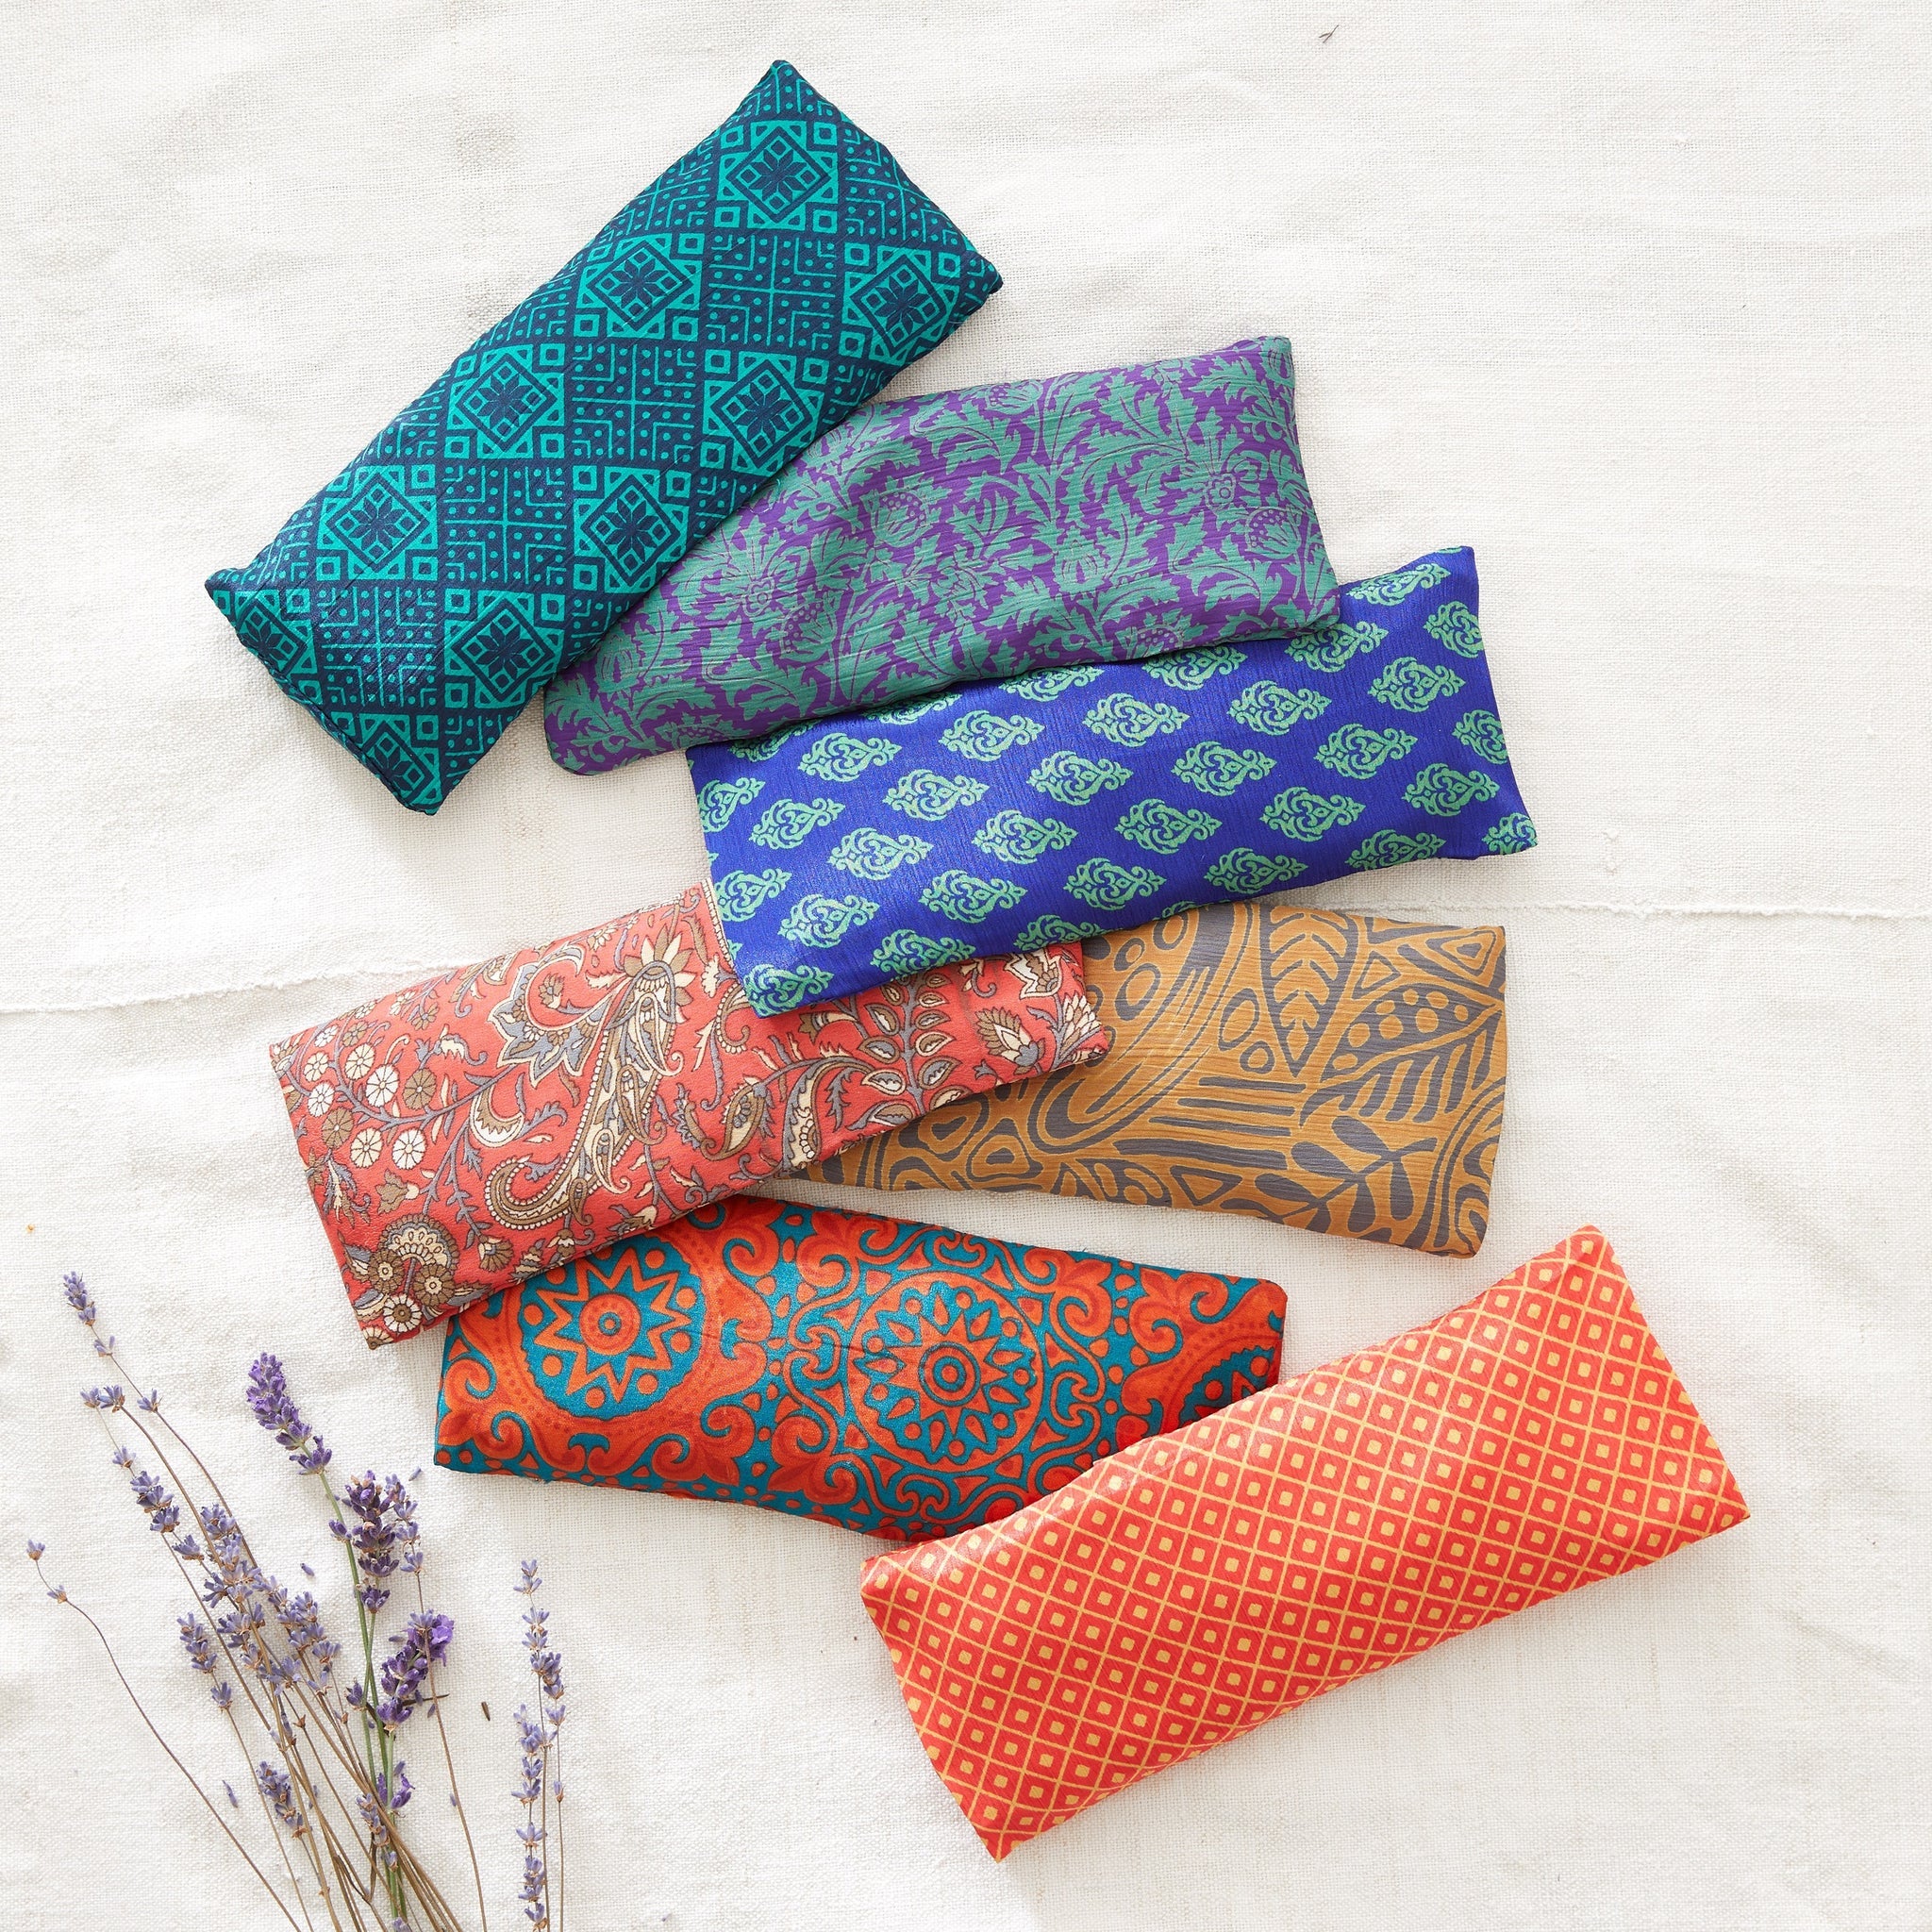 SALMEE Recycled Sari Lavender Eye Pillow (Assorted Designs)